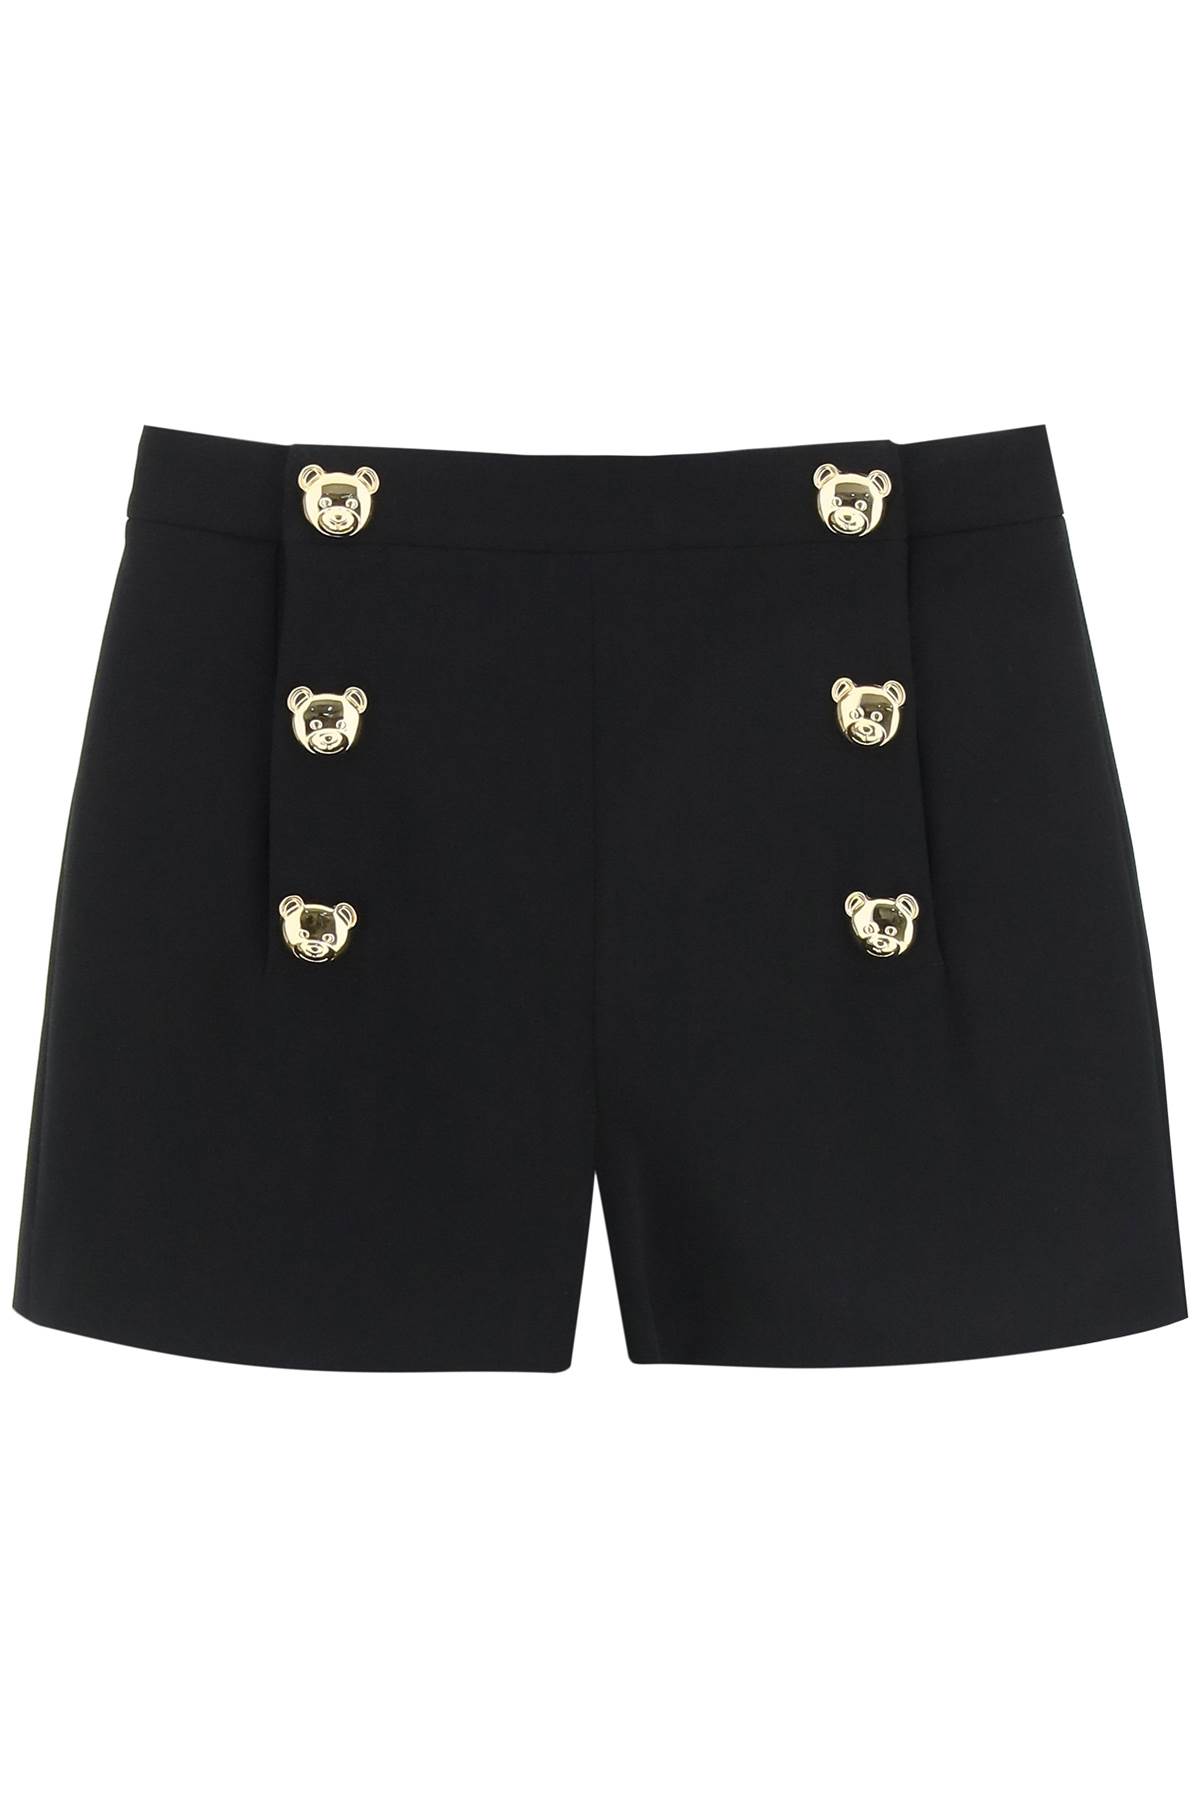 Moschino Crepe Shorts With Teddy Bear Buttons